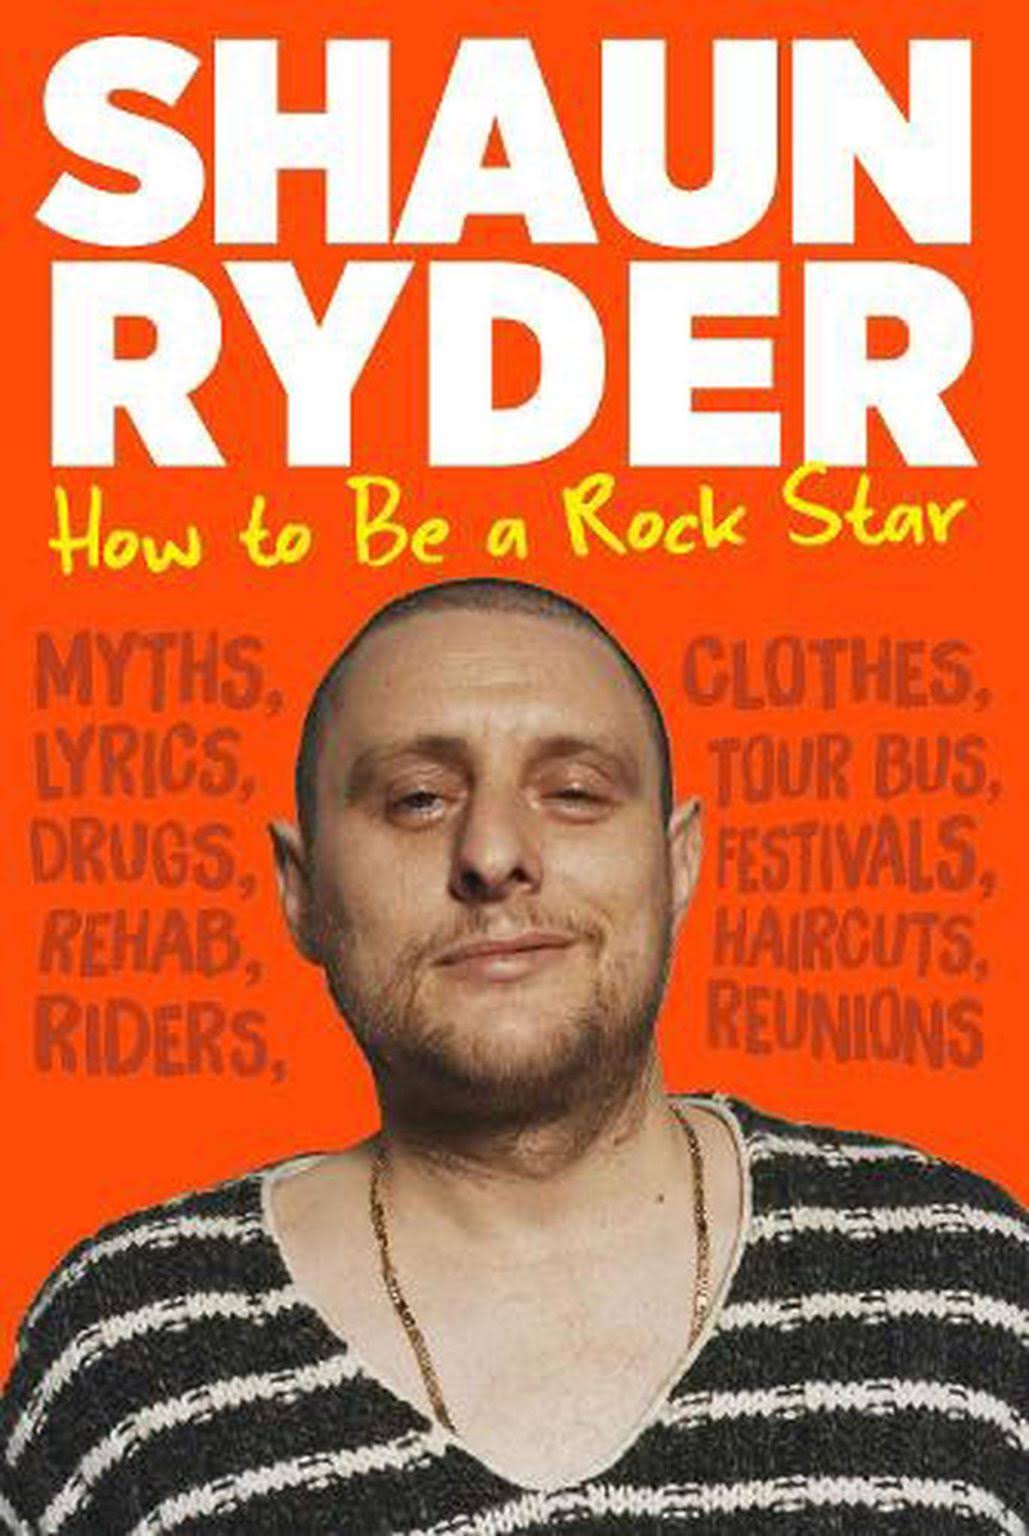 How to Be a Rock Star [Book]